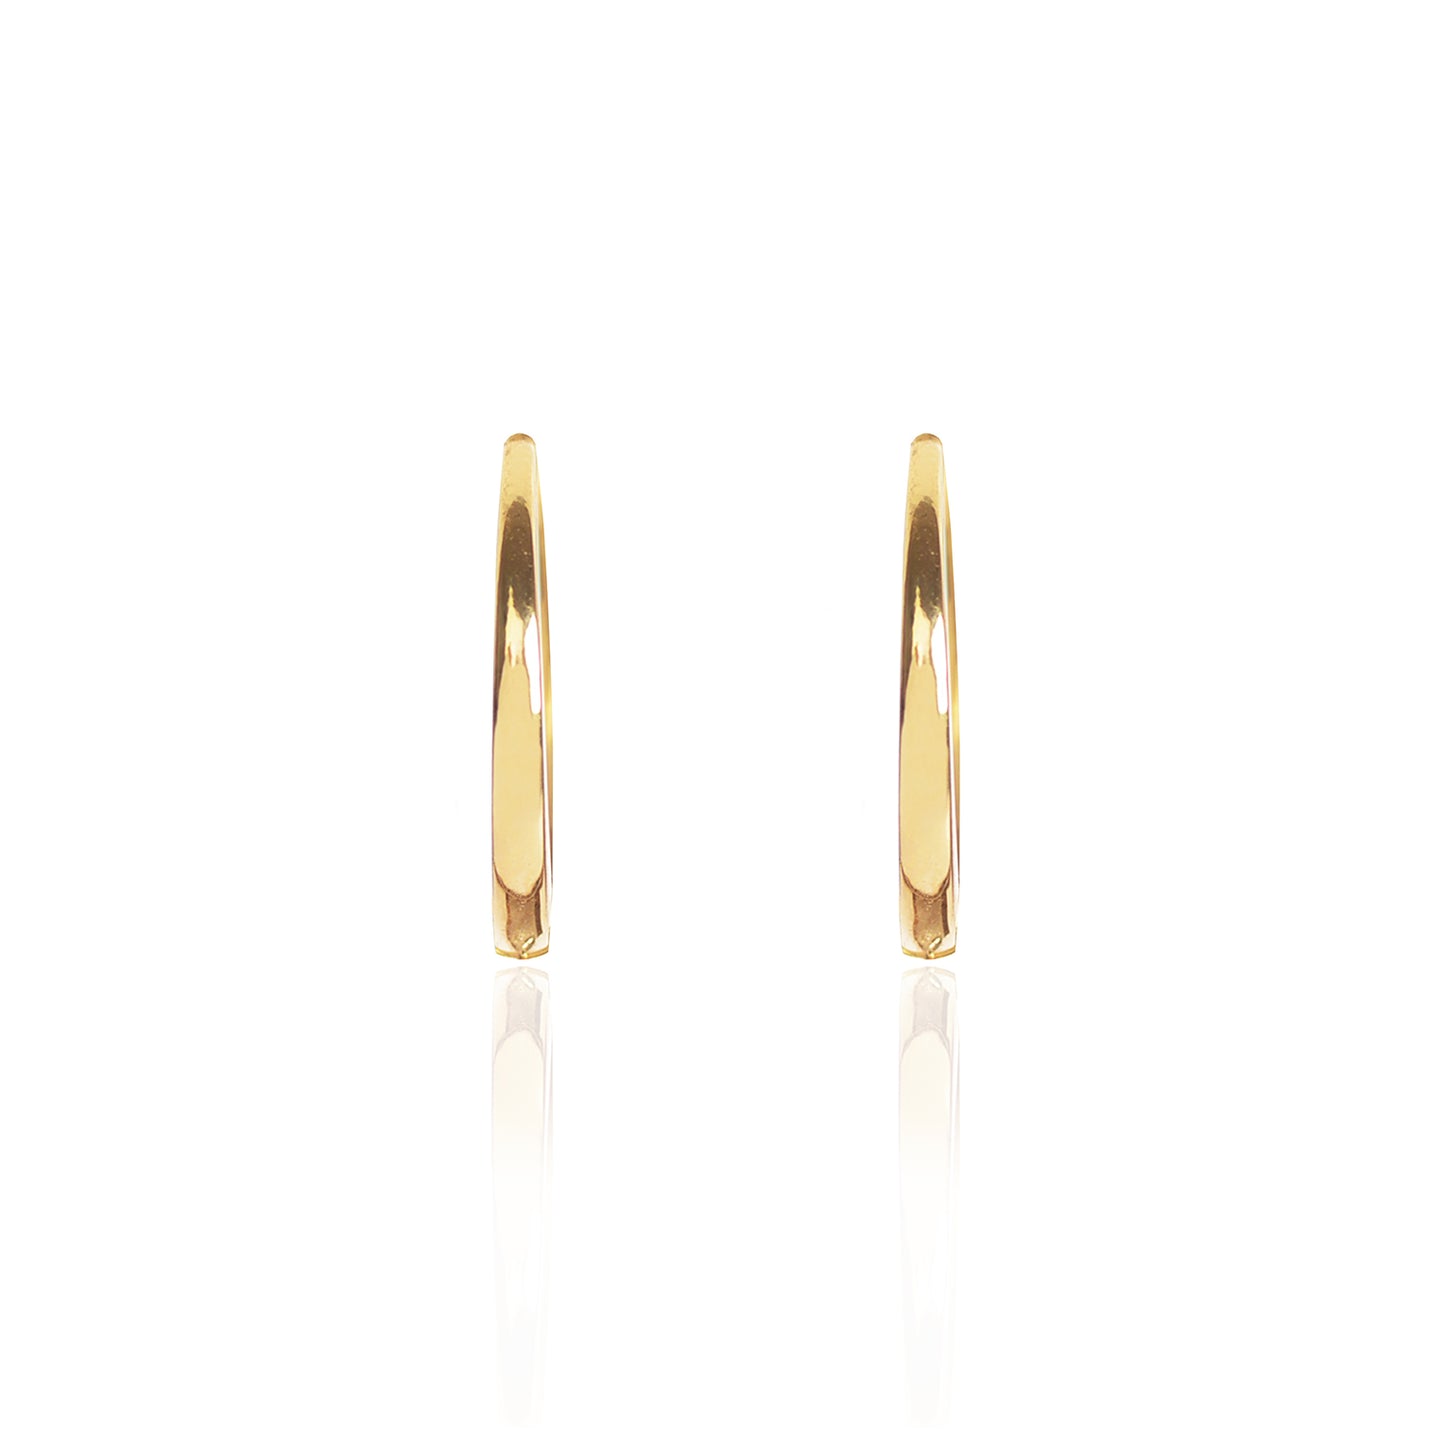 18ct yellow Gold Closed Hoops by McFarlane Fine Jewellery